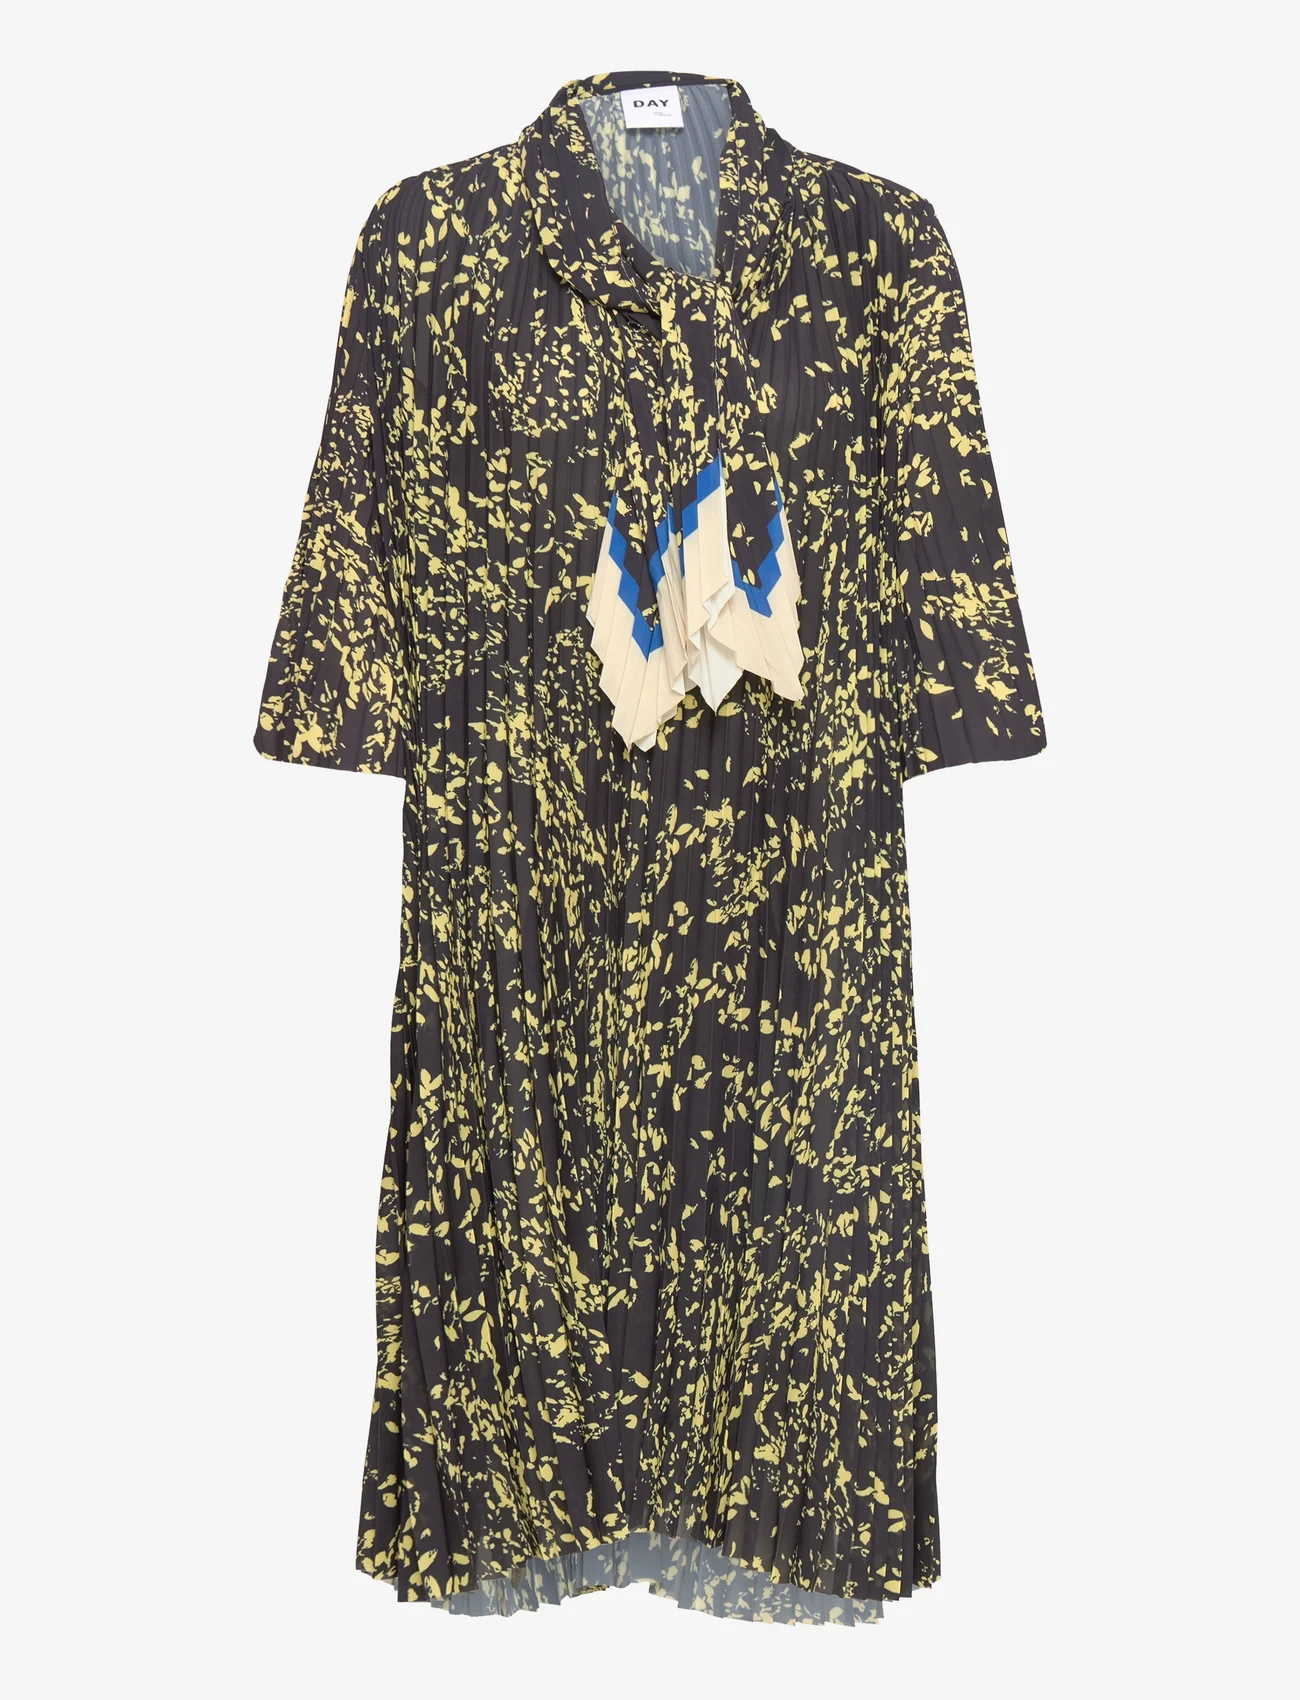 Day Birger et Mikkelsen - Caine - Abstract Leaves - midi dresses - abstract leaves - 0